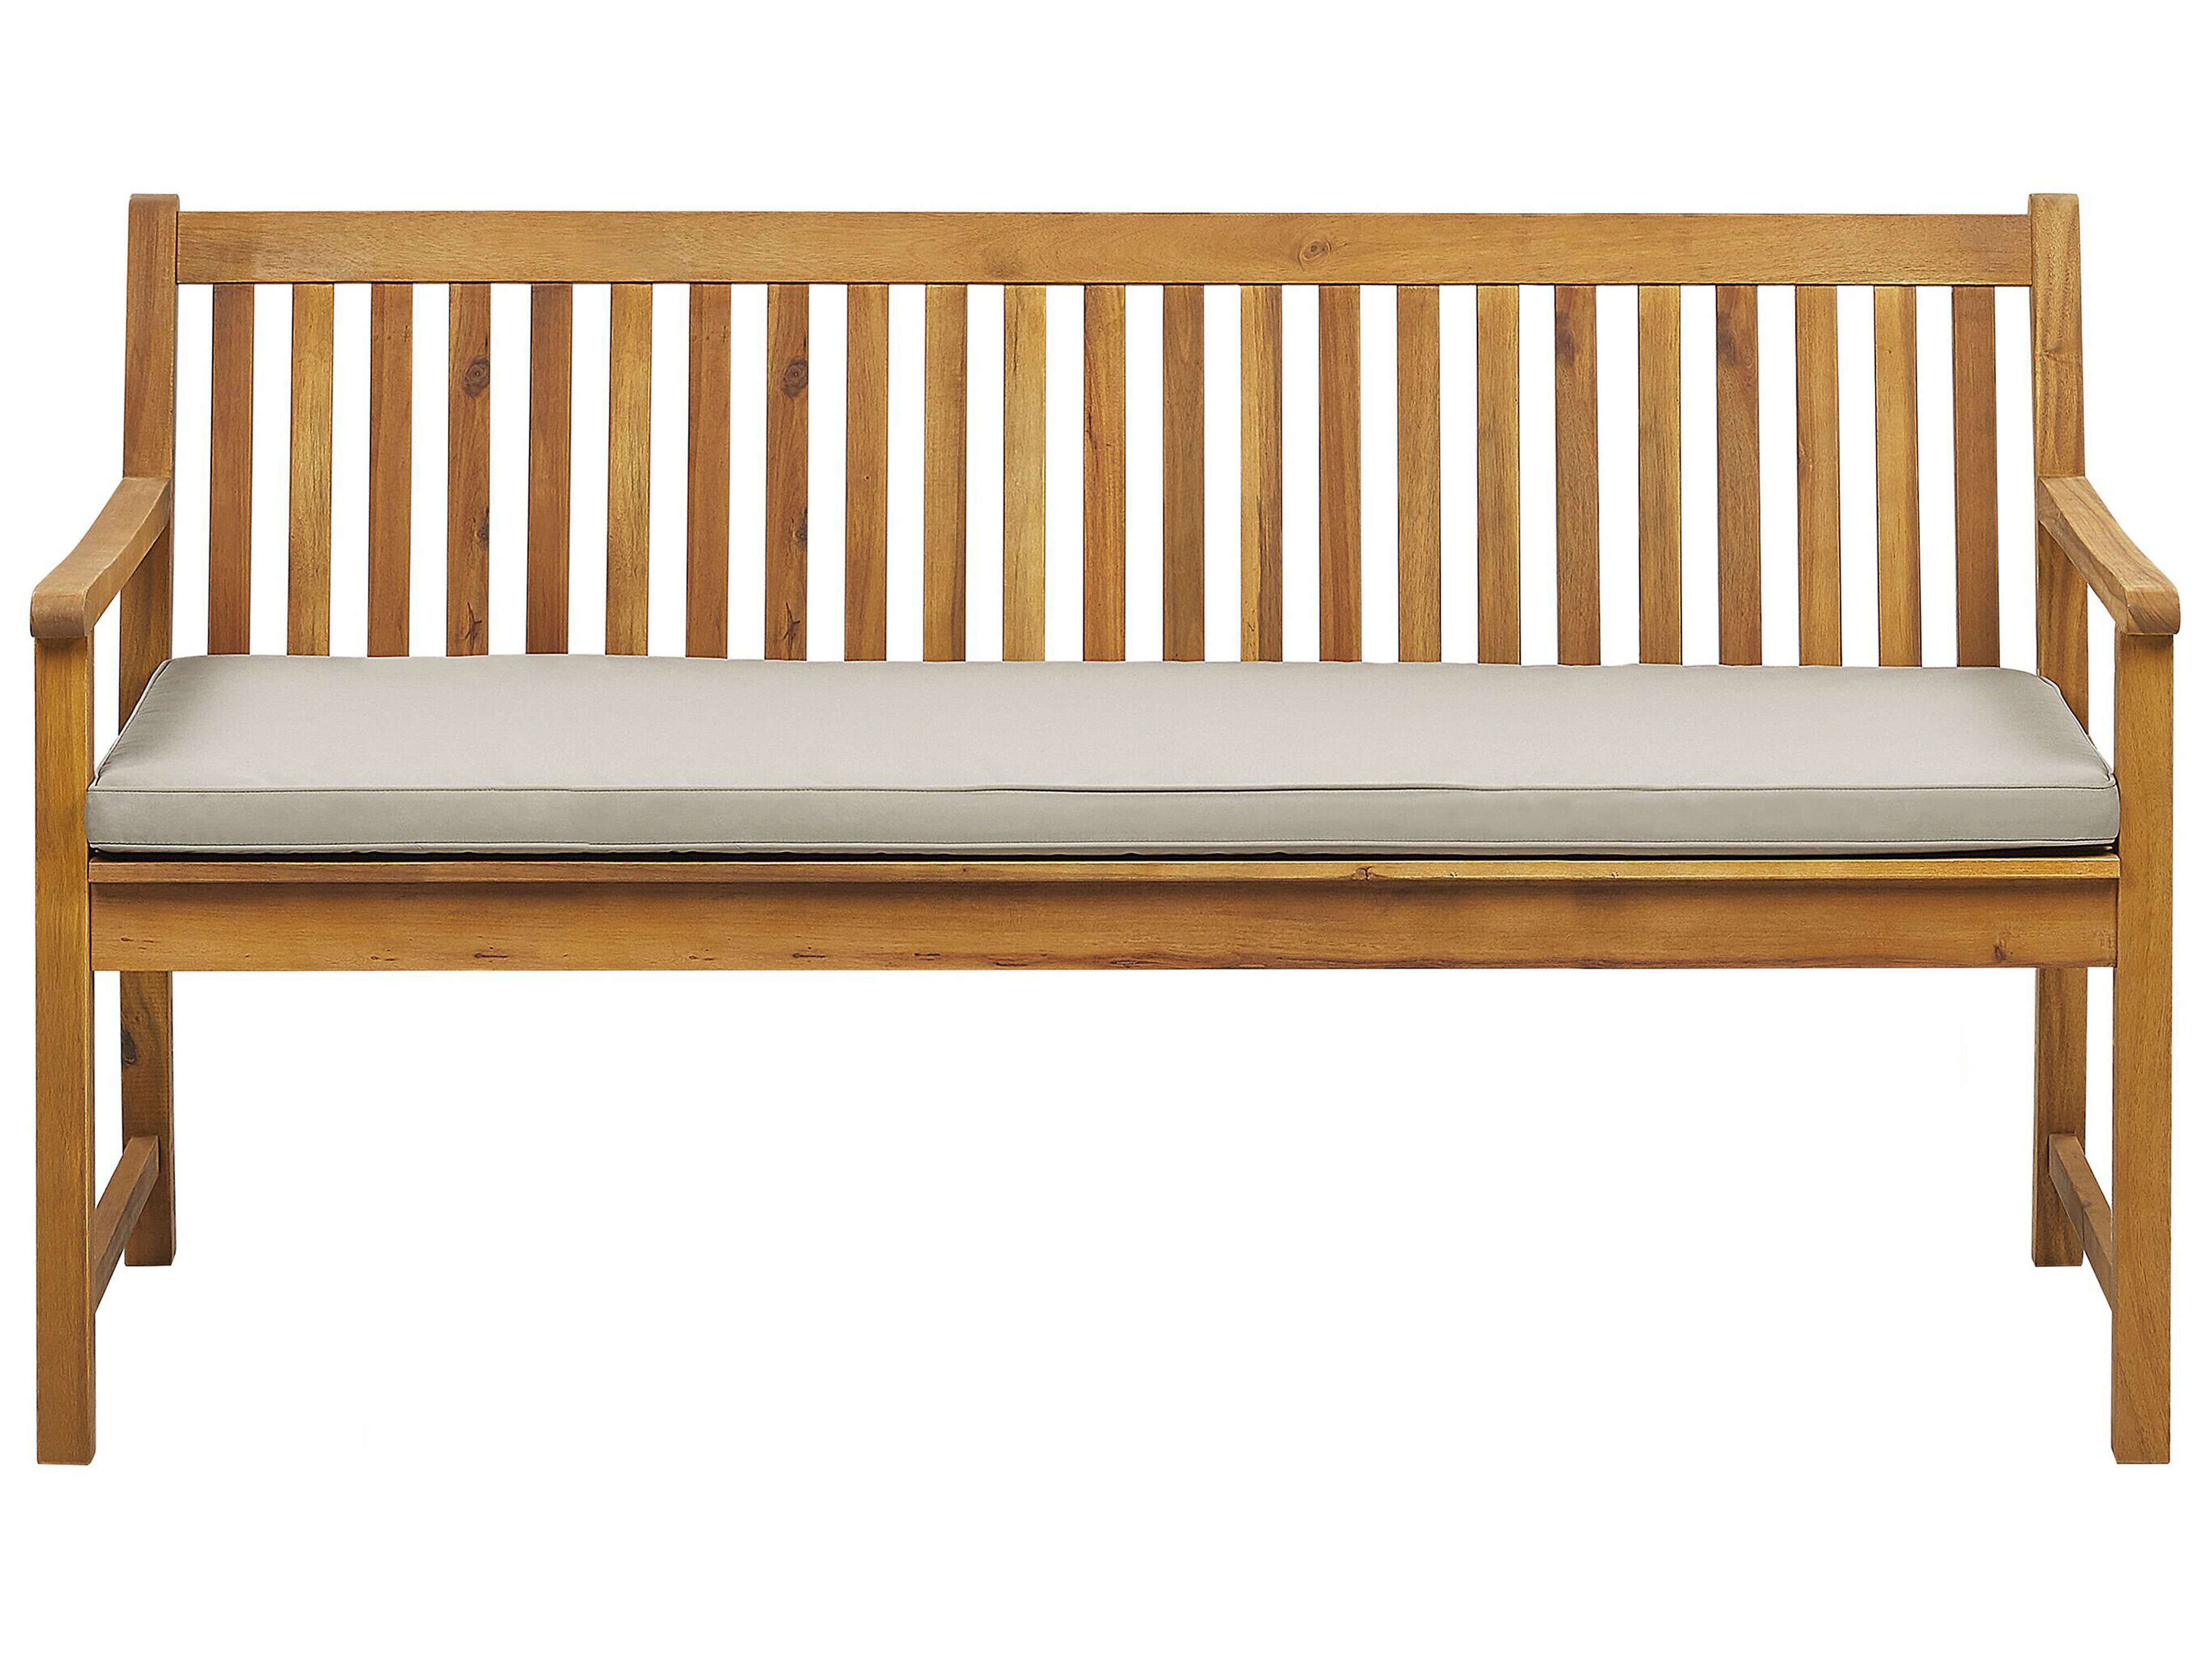 Acacia Wood Garden Bench 160 cm with Taupe Cushion VIVARA Furniture,  lamps  accessories up to 70% off Avandeo online store